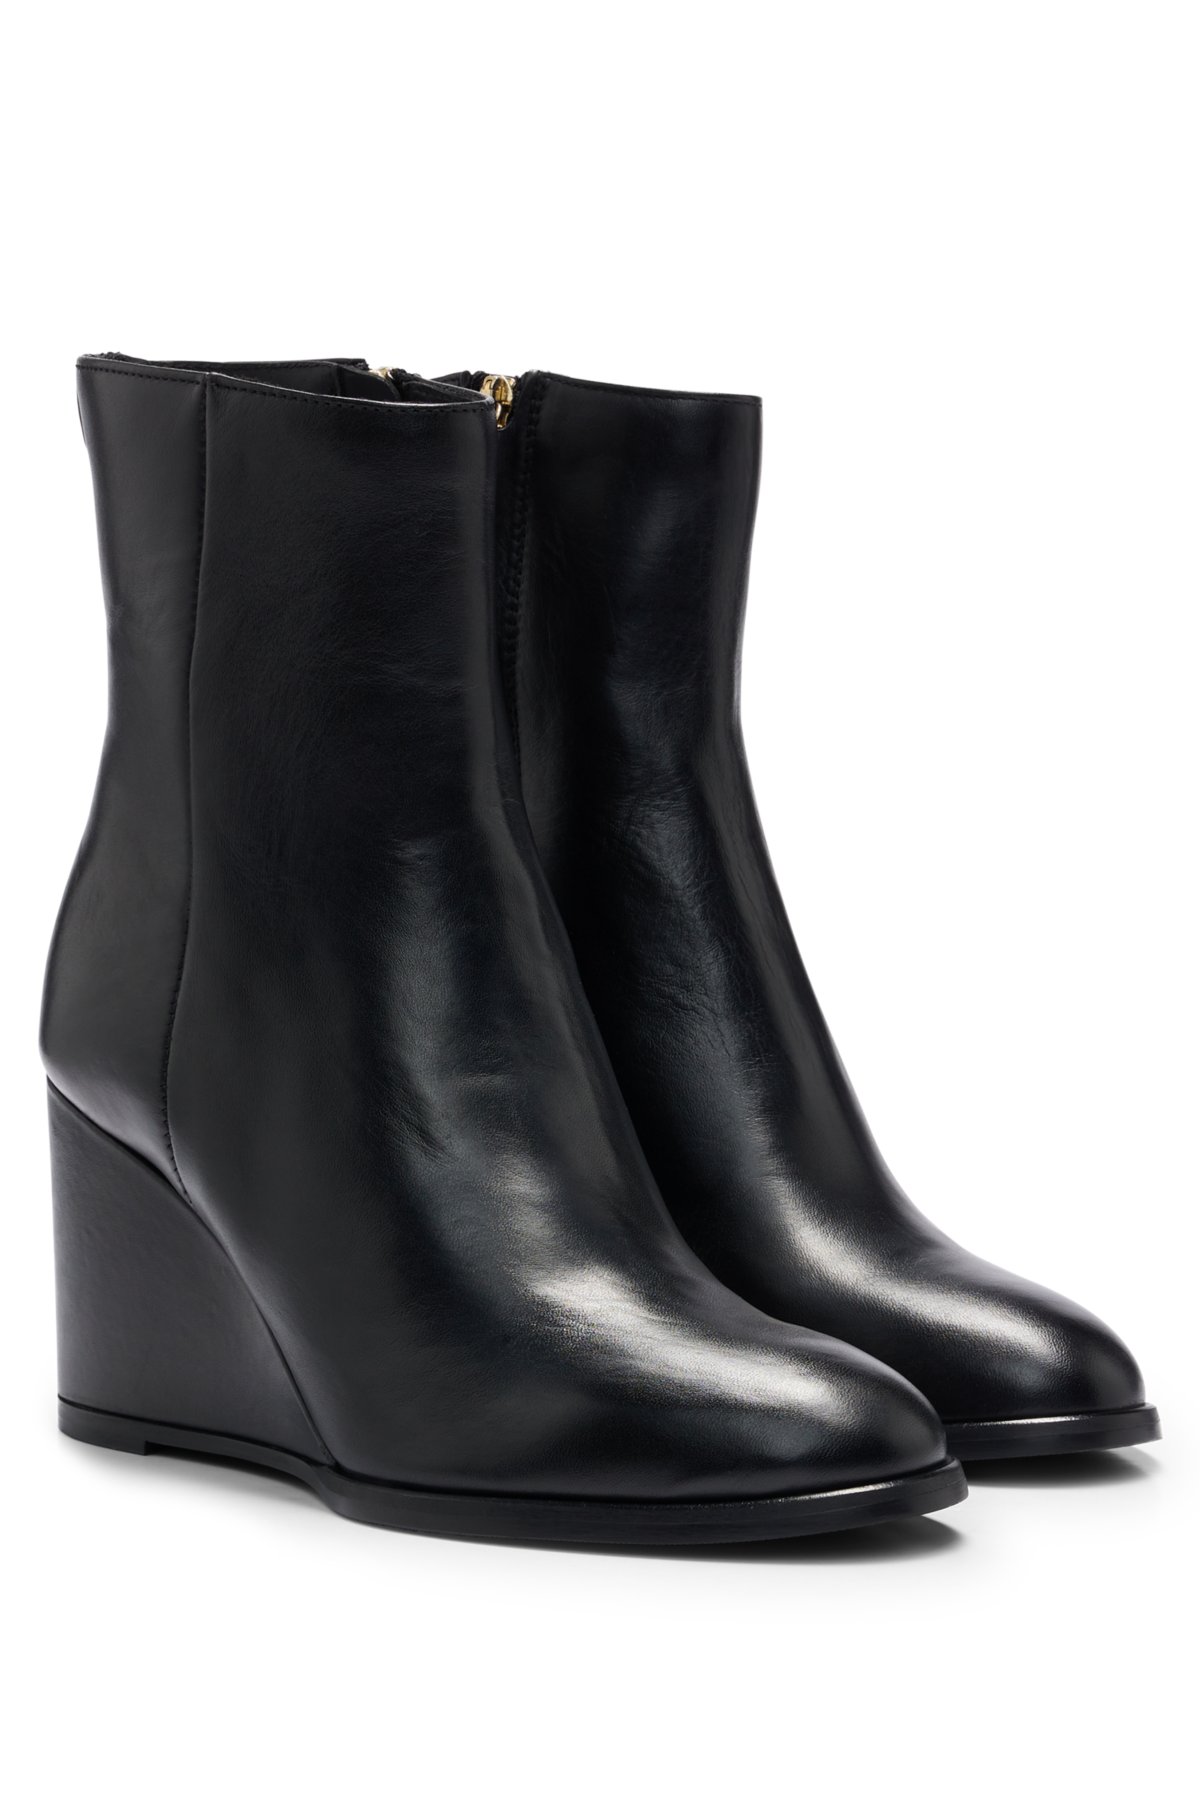 BOSS - Italian-made ankle boots in leather with